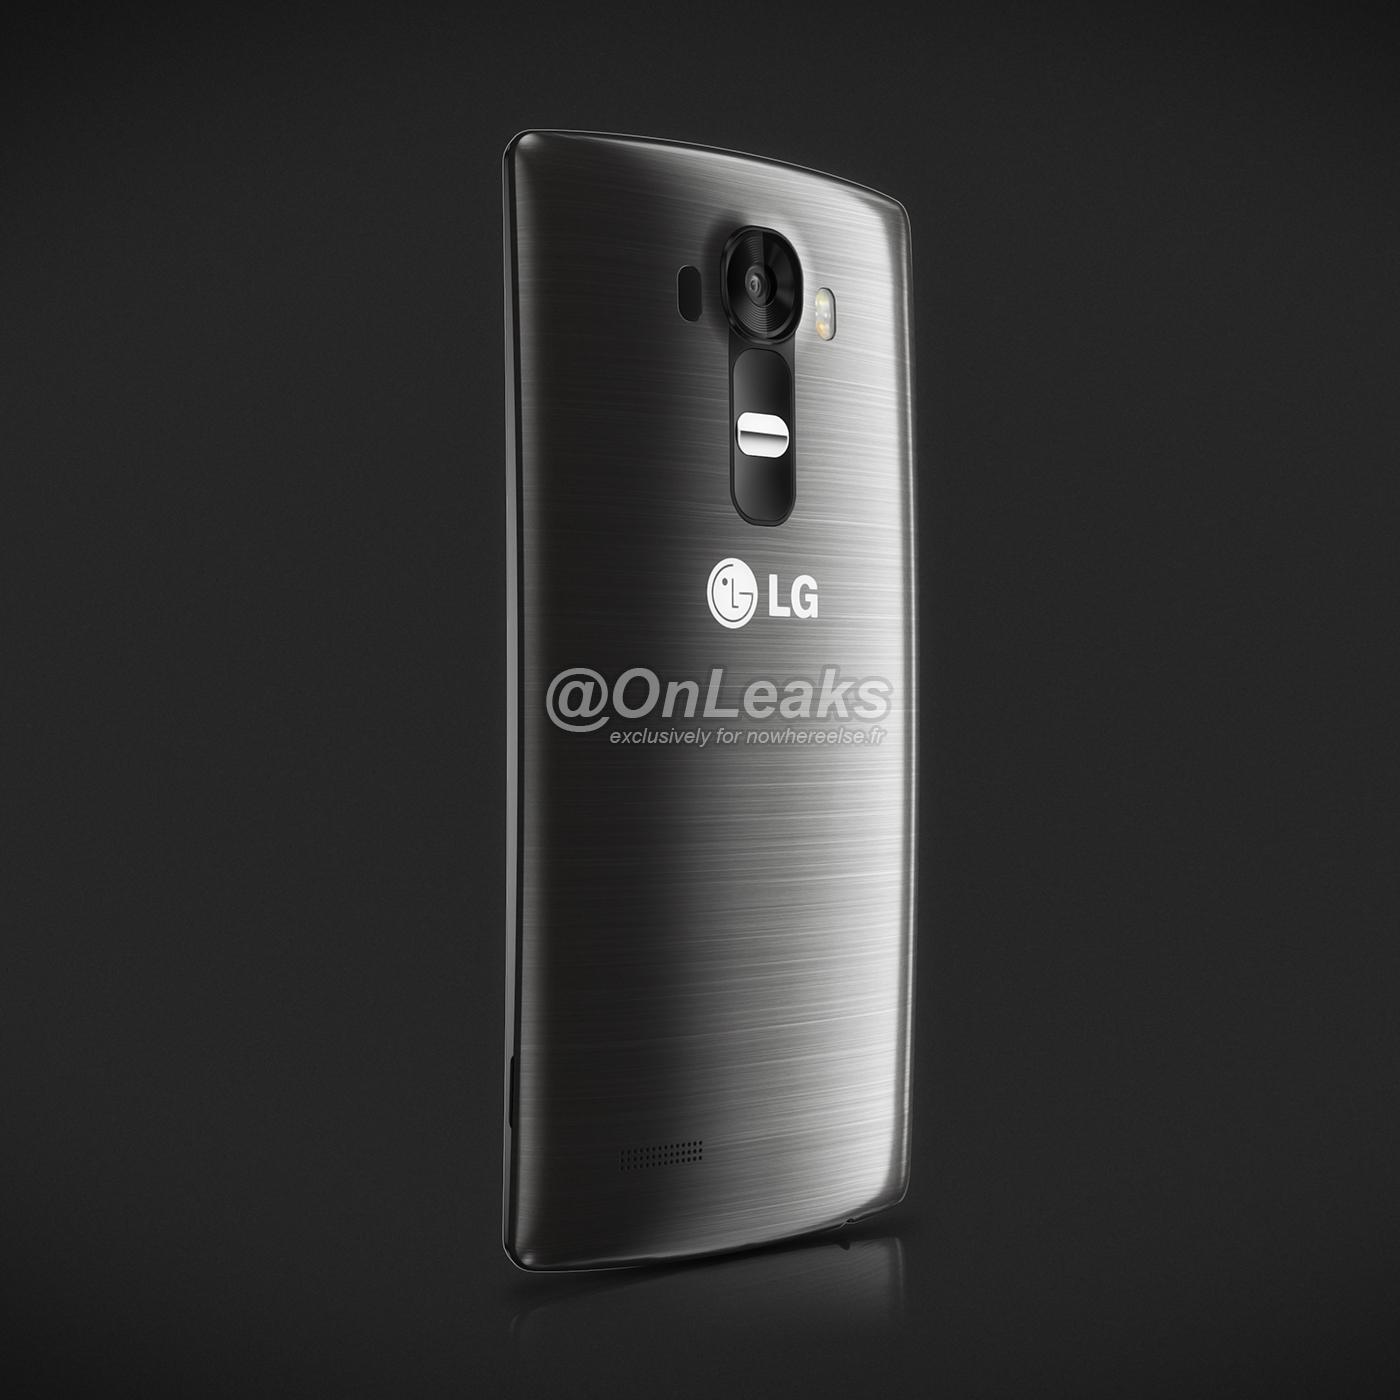 Lg G4 First Cases Show Up New Image Shows The Slight Curve Of Its